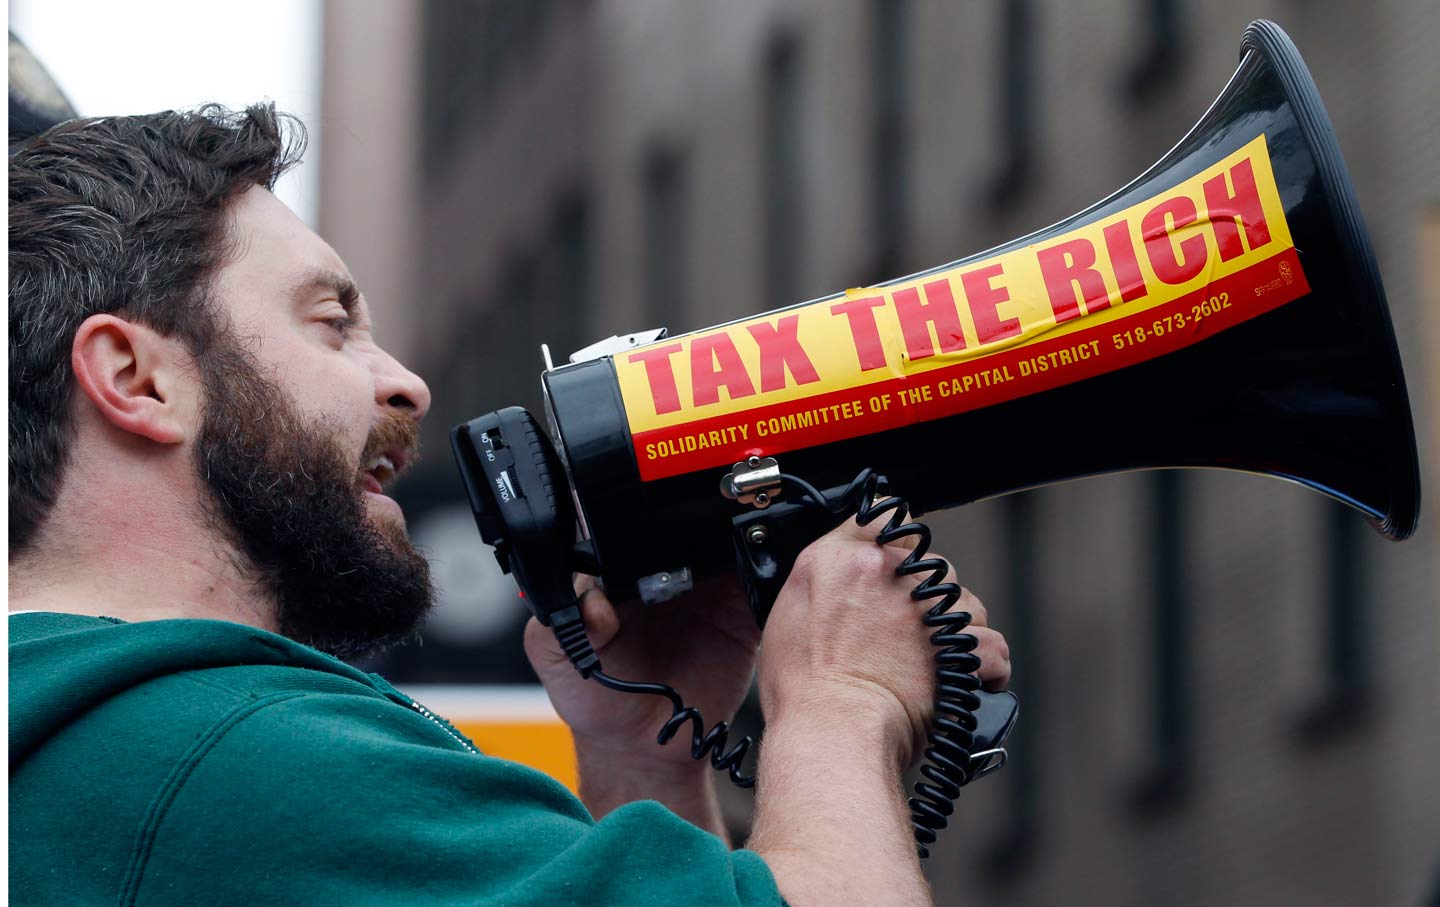 A protester with a bullhorn at a protest in Albany